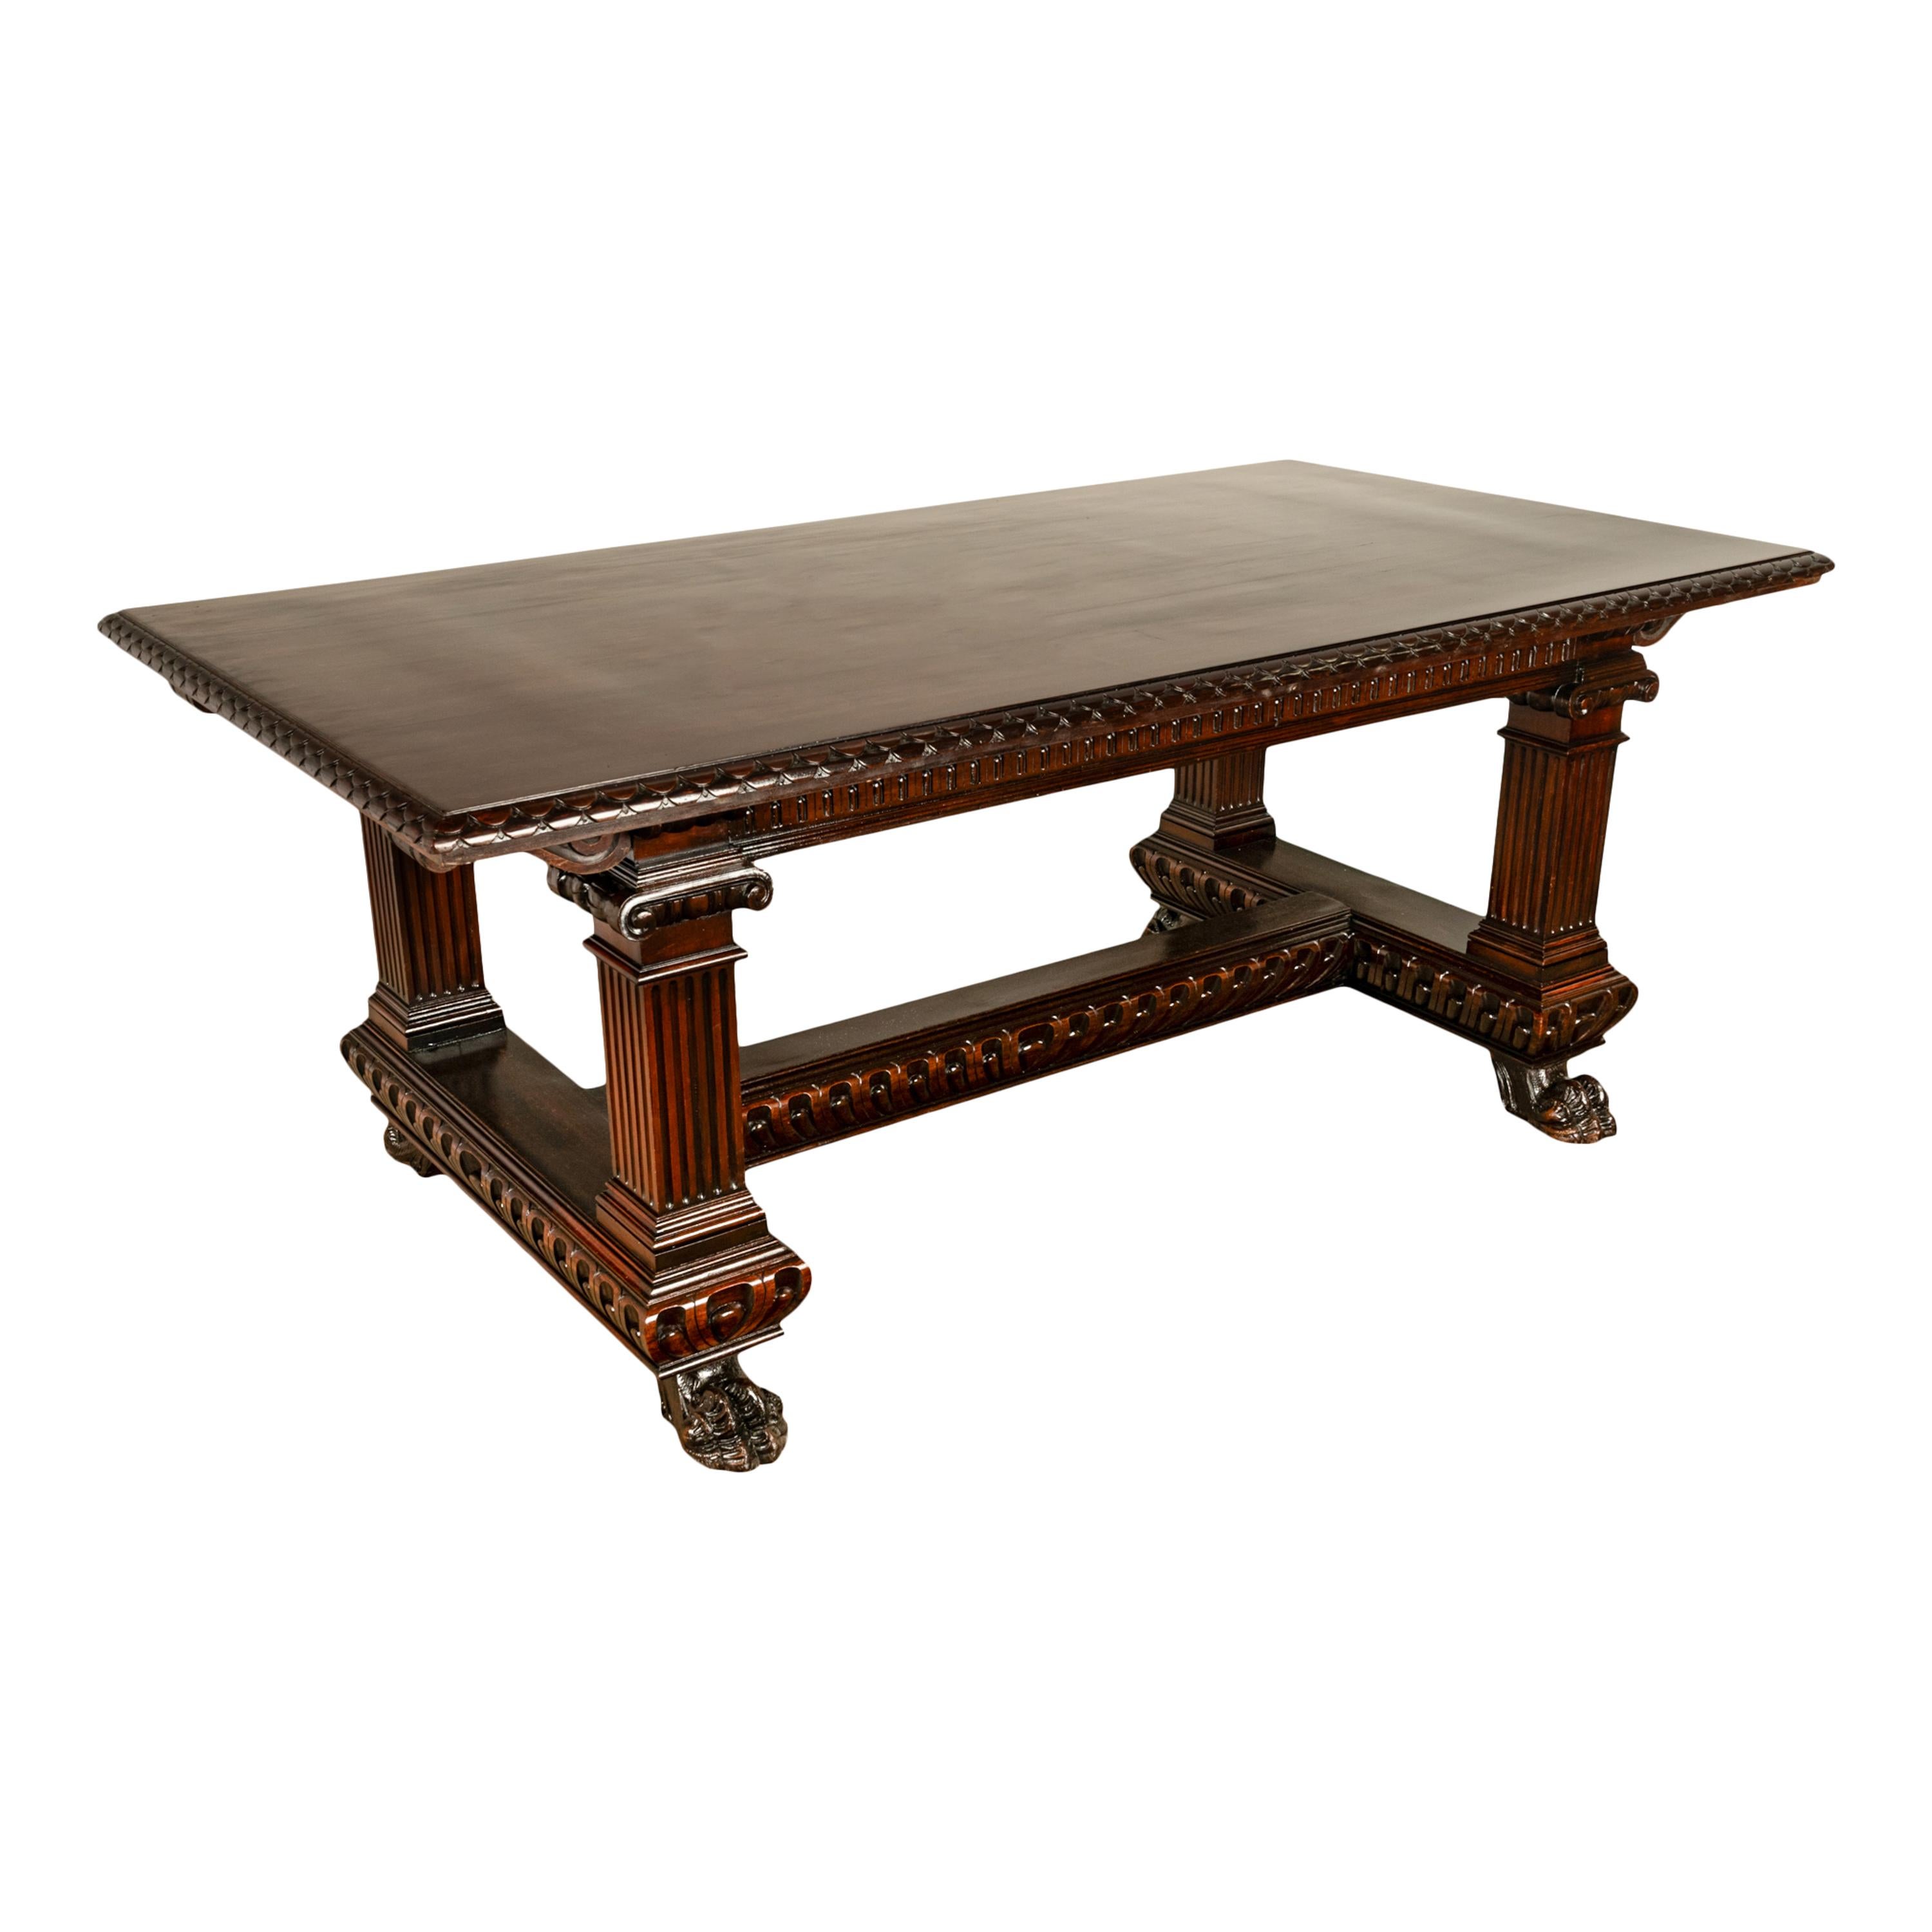 Antique Italian Carved Renaissance Revival Walnut Library Dining Table 1880 For Sale 2